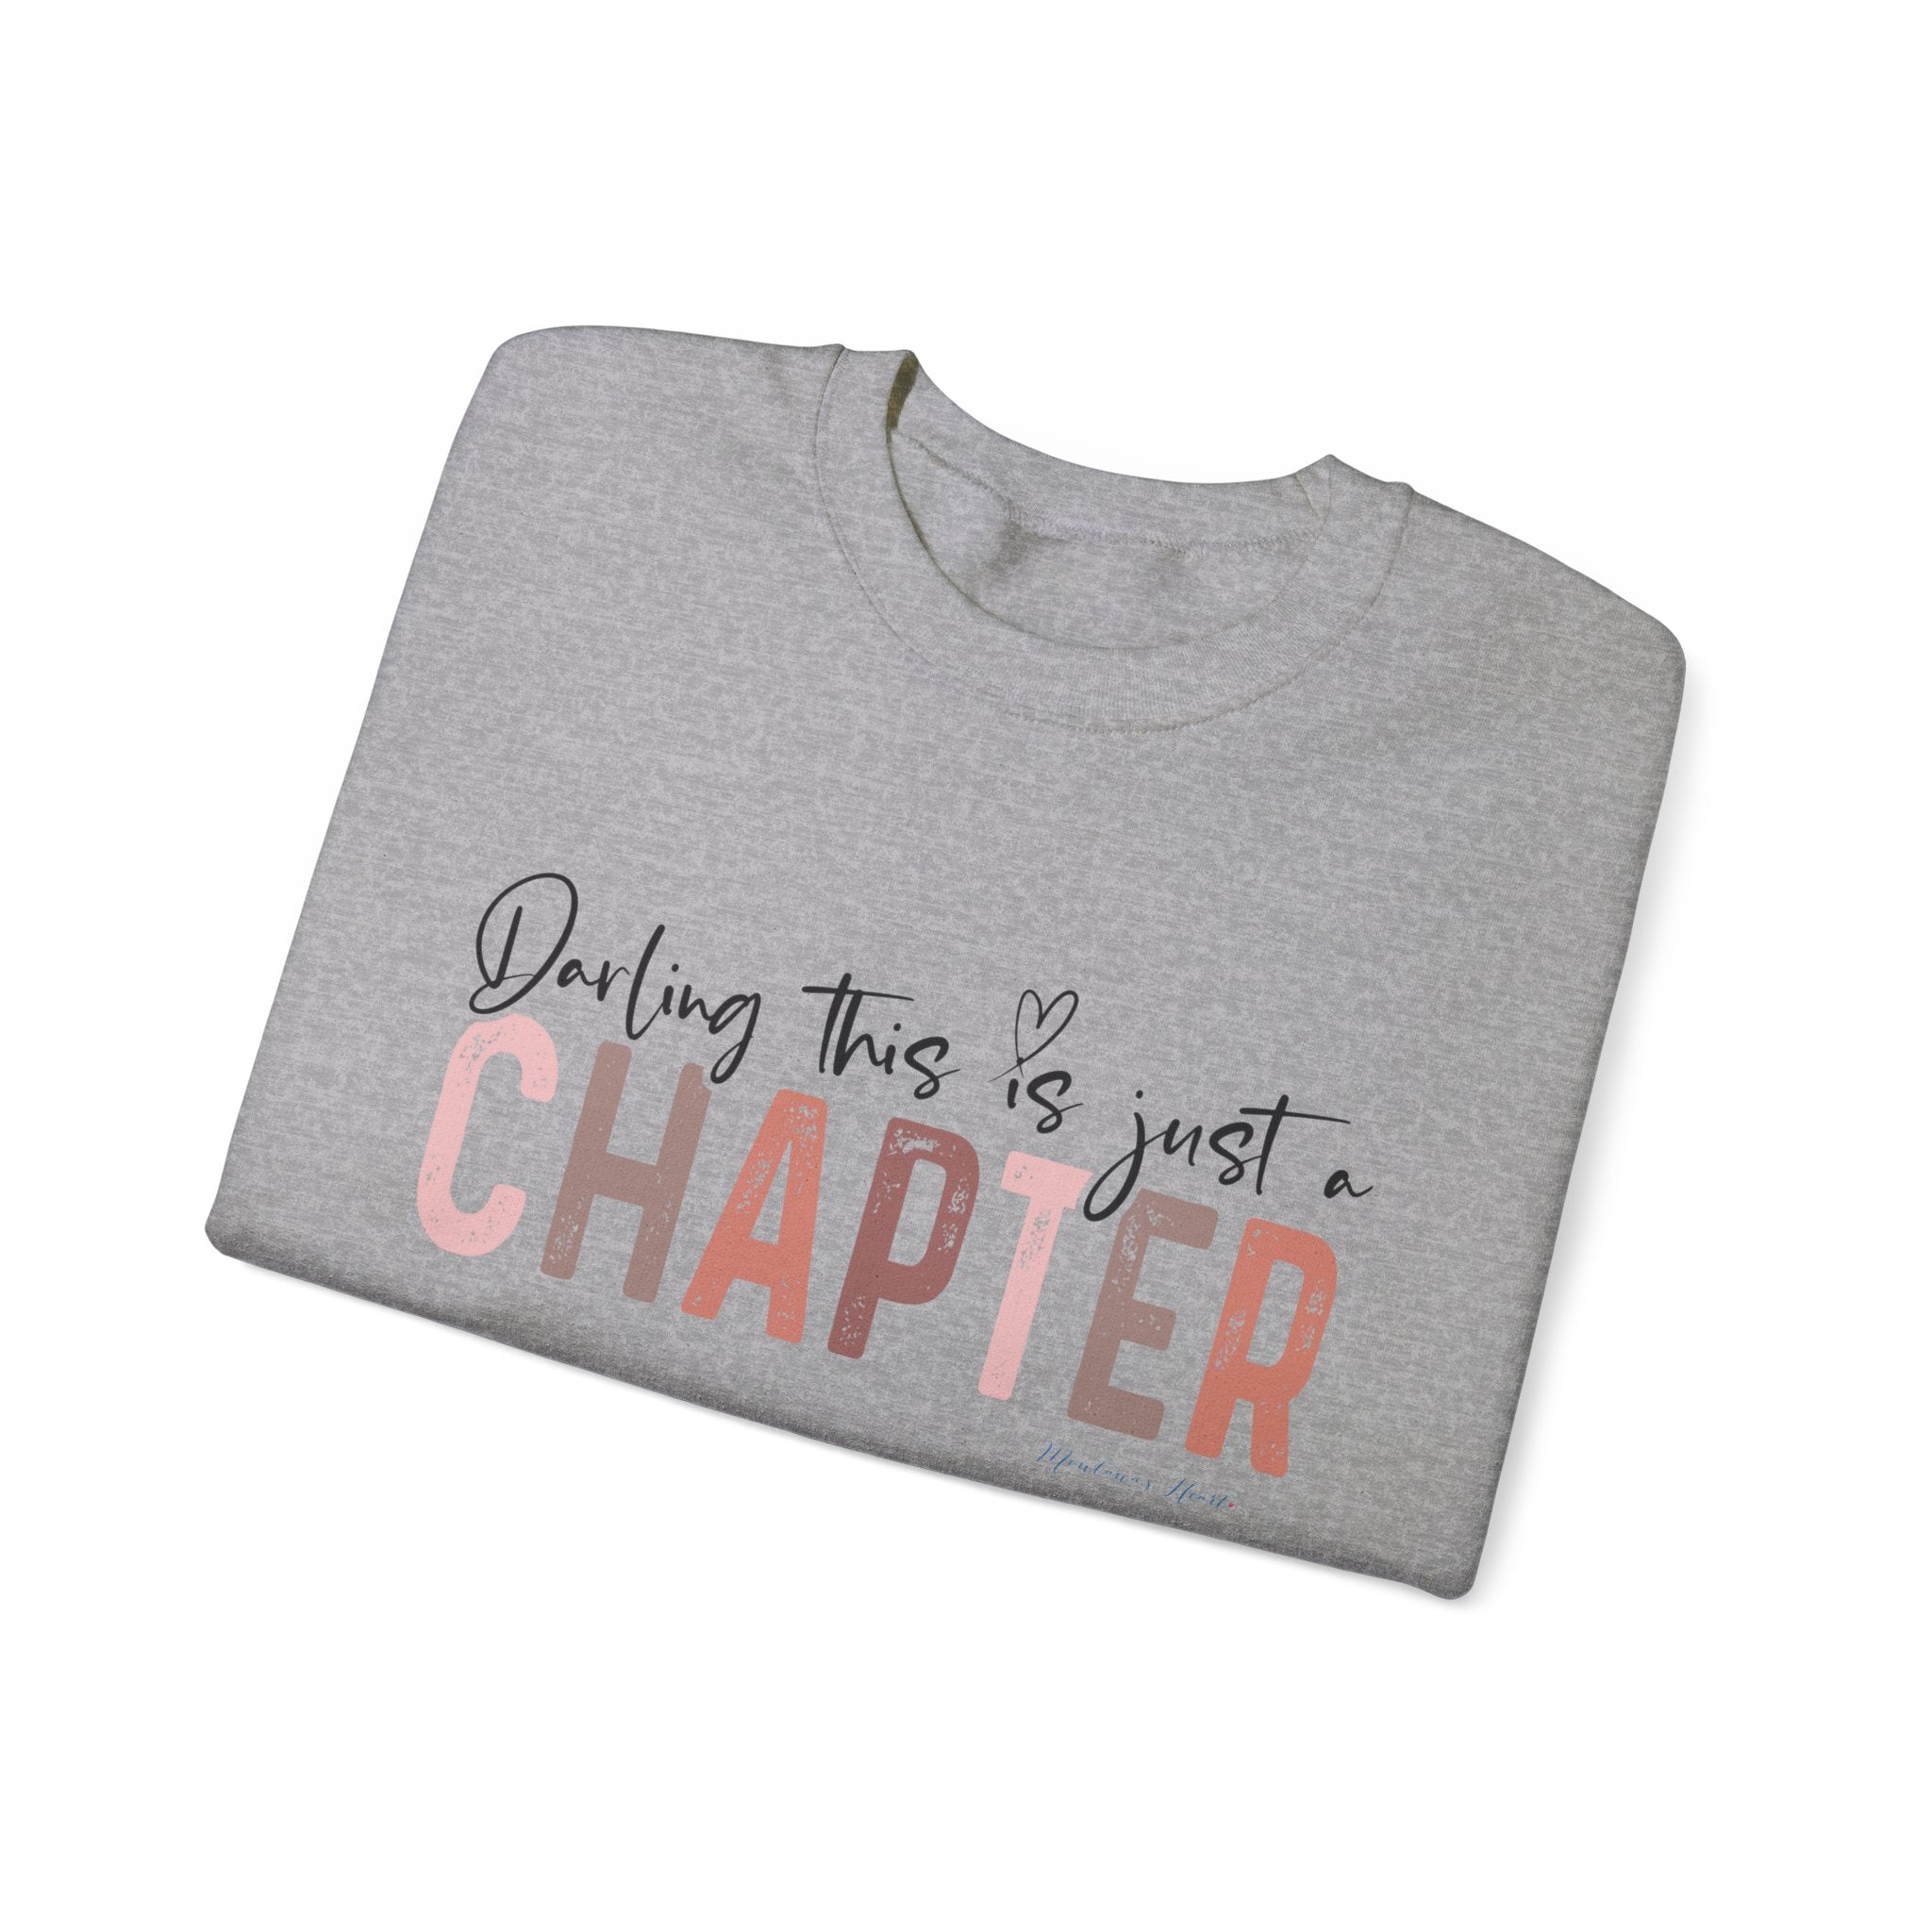 Darling, this is just a chapter, not the whole story , Ladies Unisex Heavy Blend  Sweatshirt